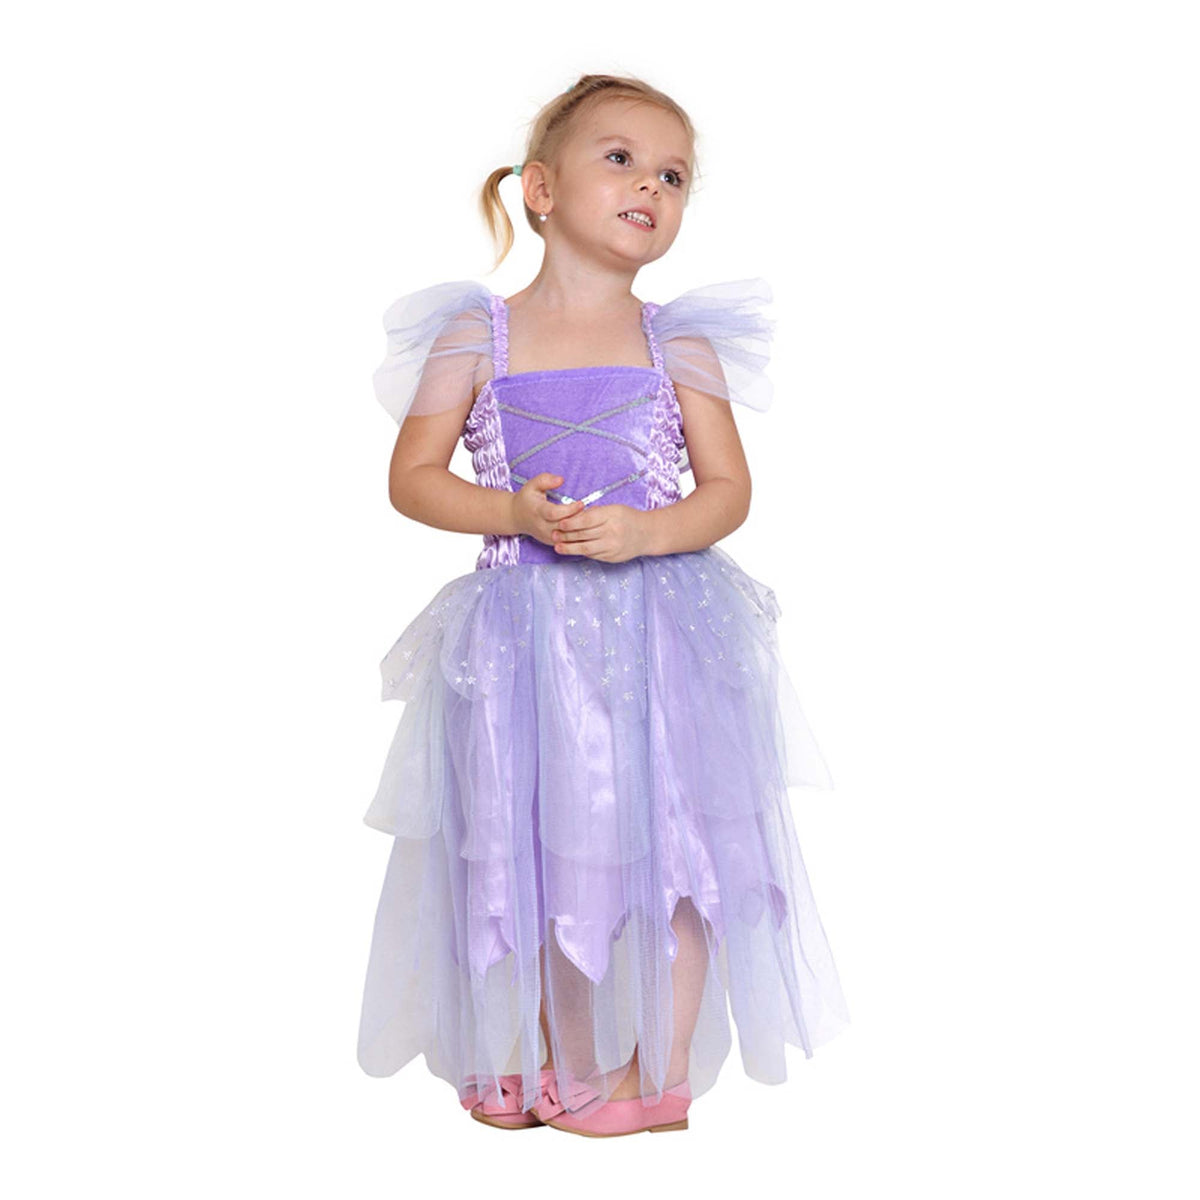 IVY TRADING INC. Costume Accessories Purple Fairy Dress for Kids